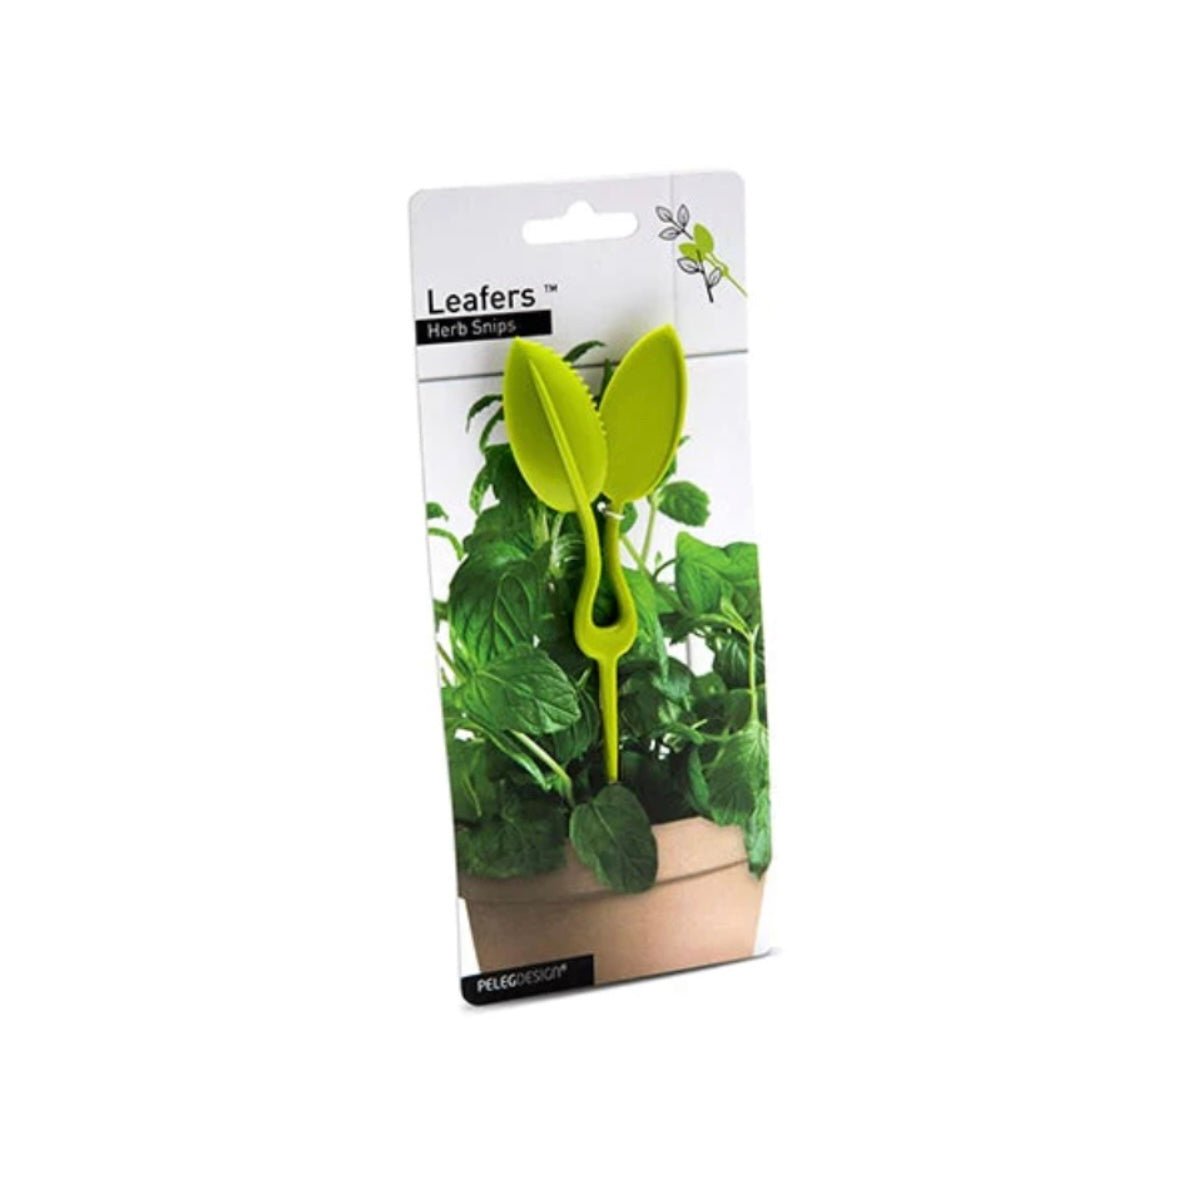 Leafers - Herb Snips - The Flower Crate